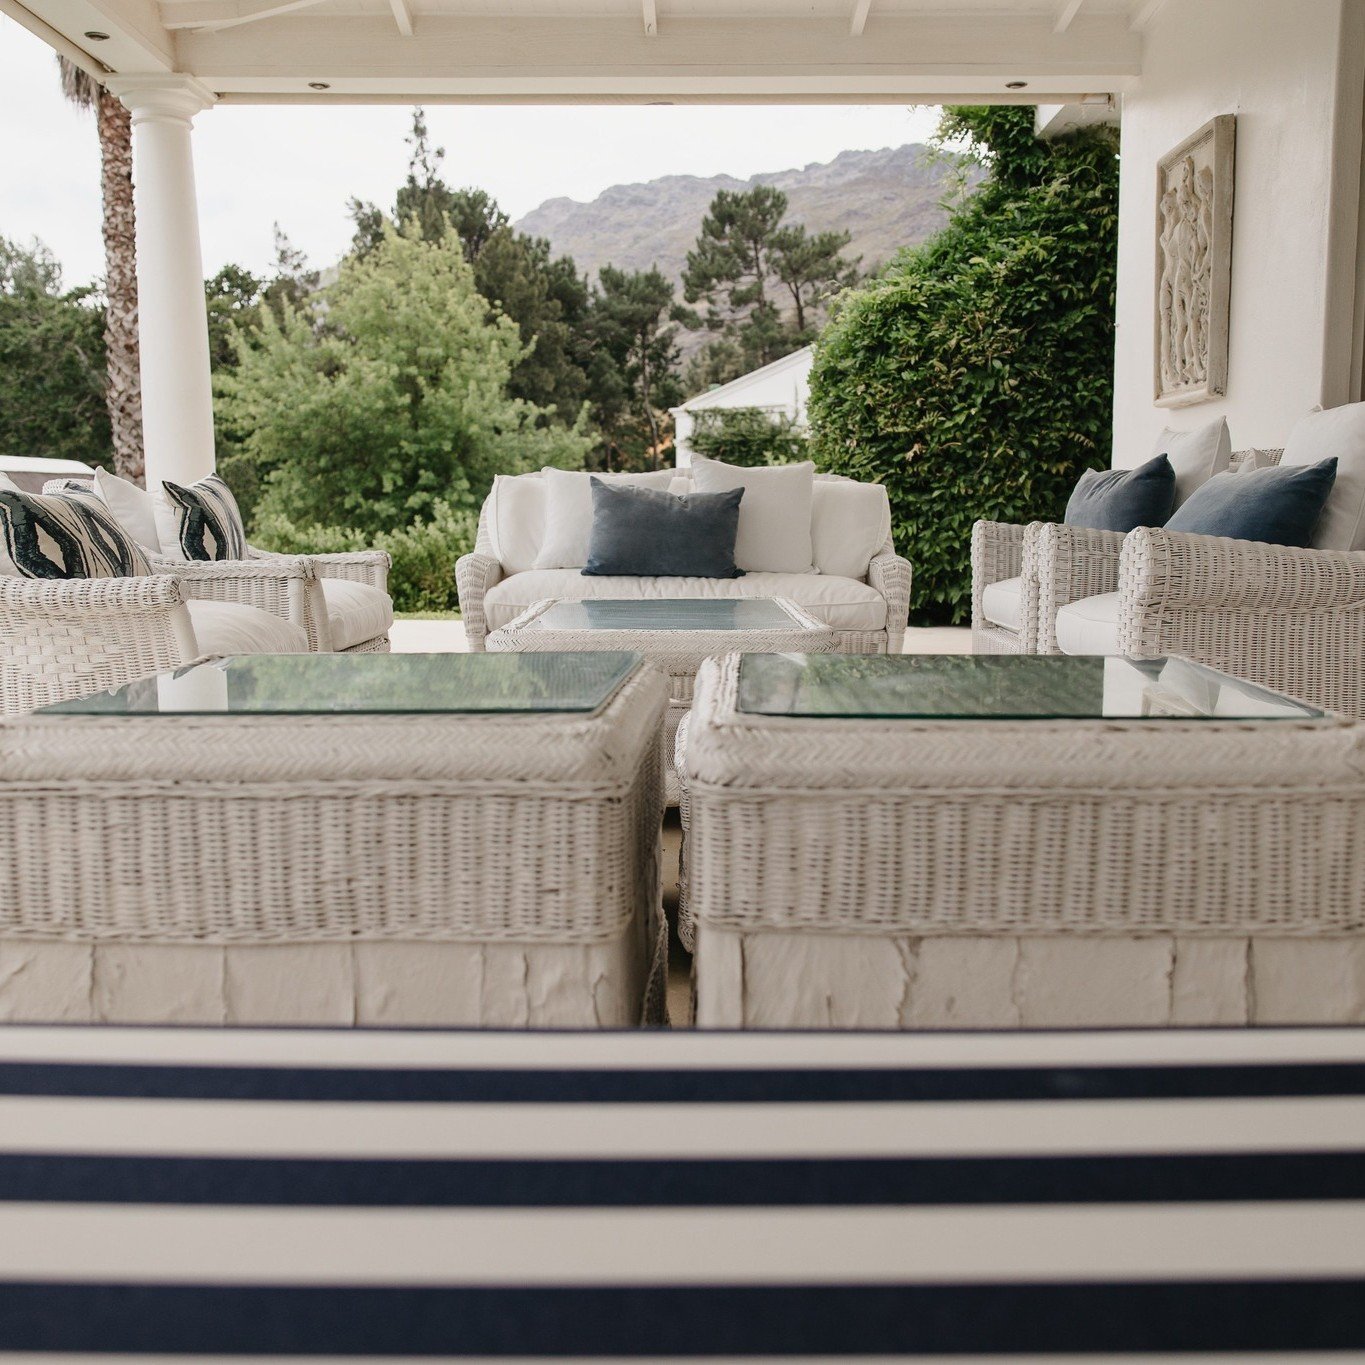 To wake up and be able to sit on this patio, is one of the best feelings. Just relaxing and taking in all that the estate has to offer. 

Our patio space is filled with our hotel furniture and dining tables for our guests to enjoy during their stay. 